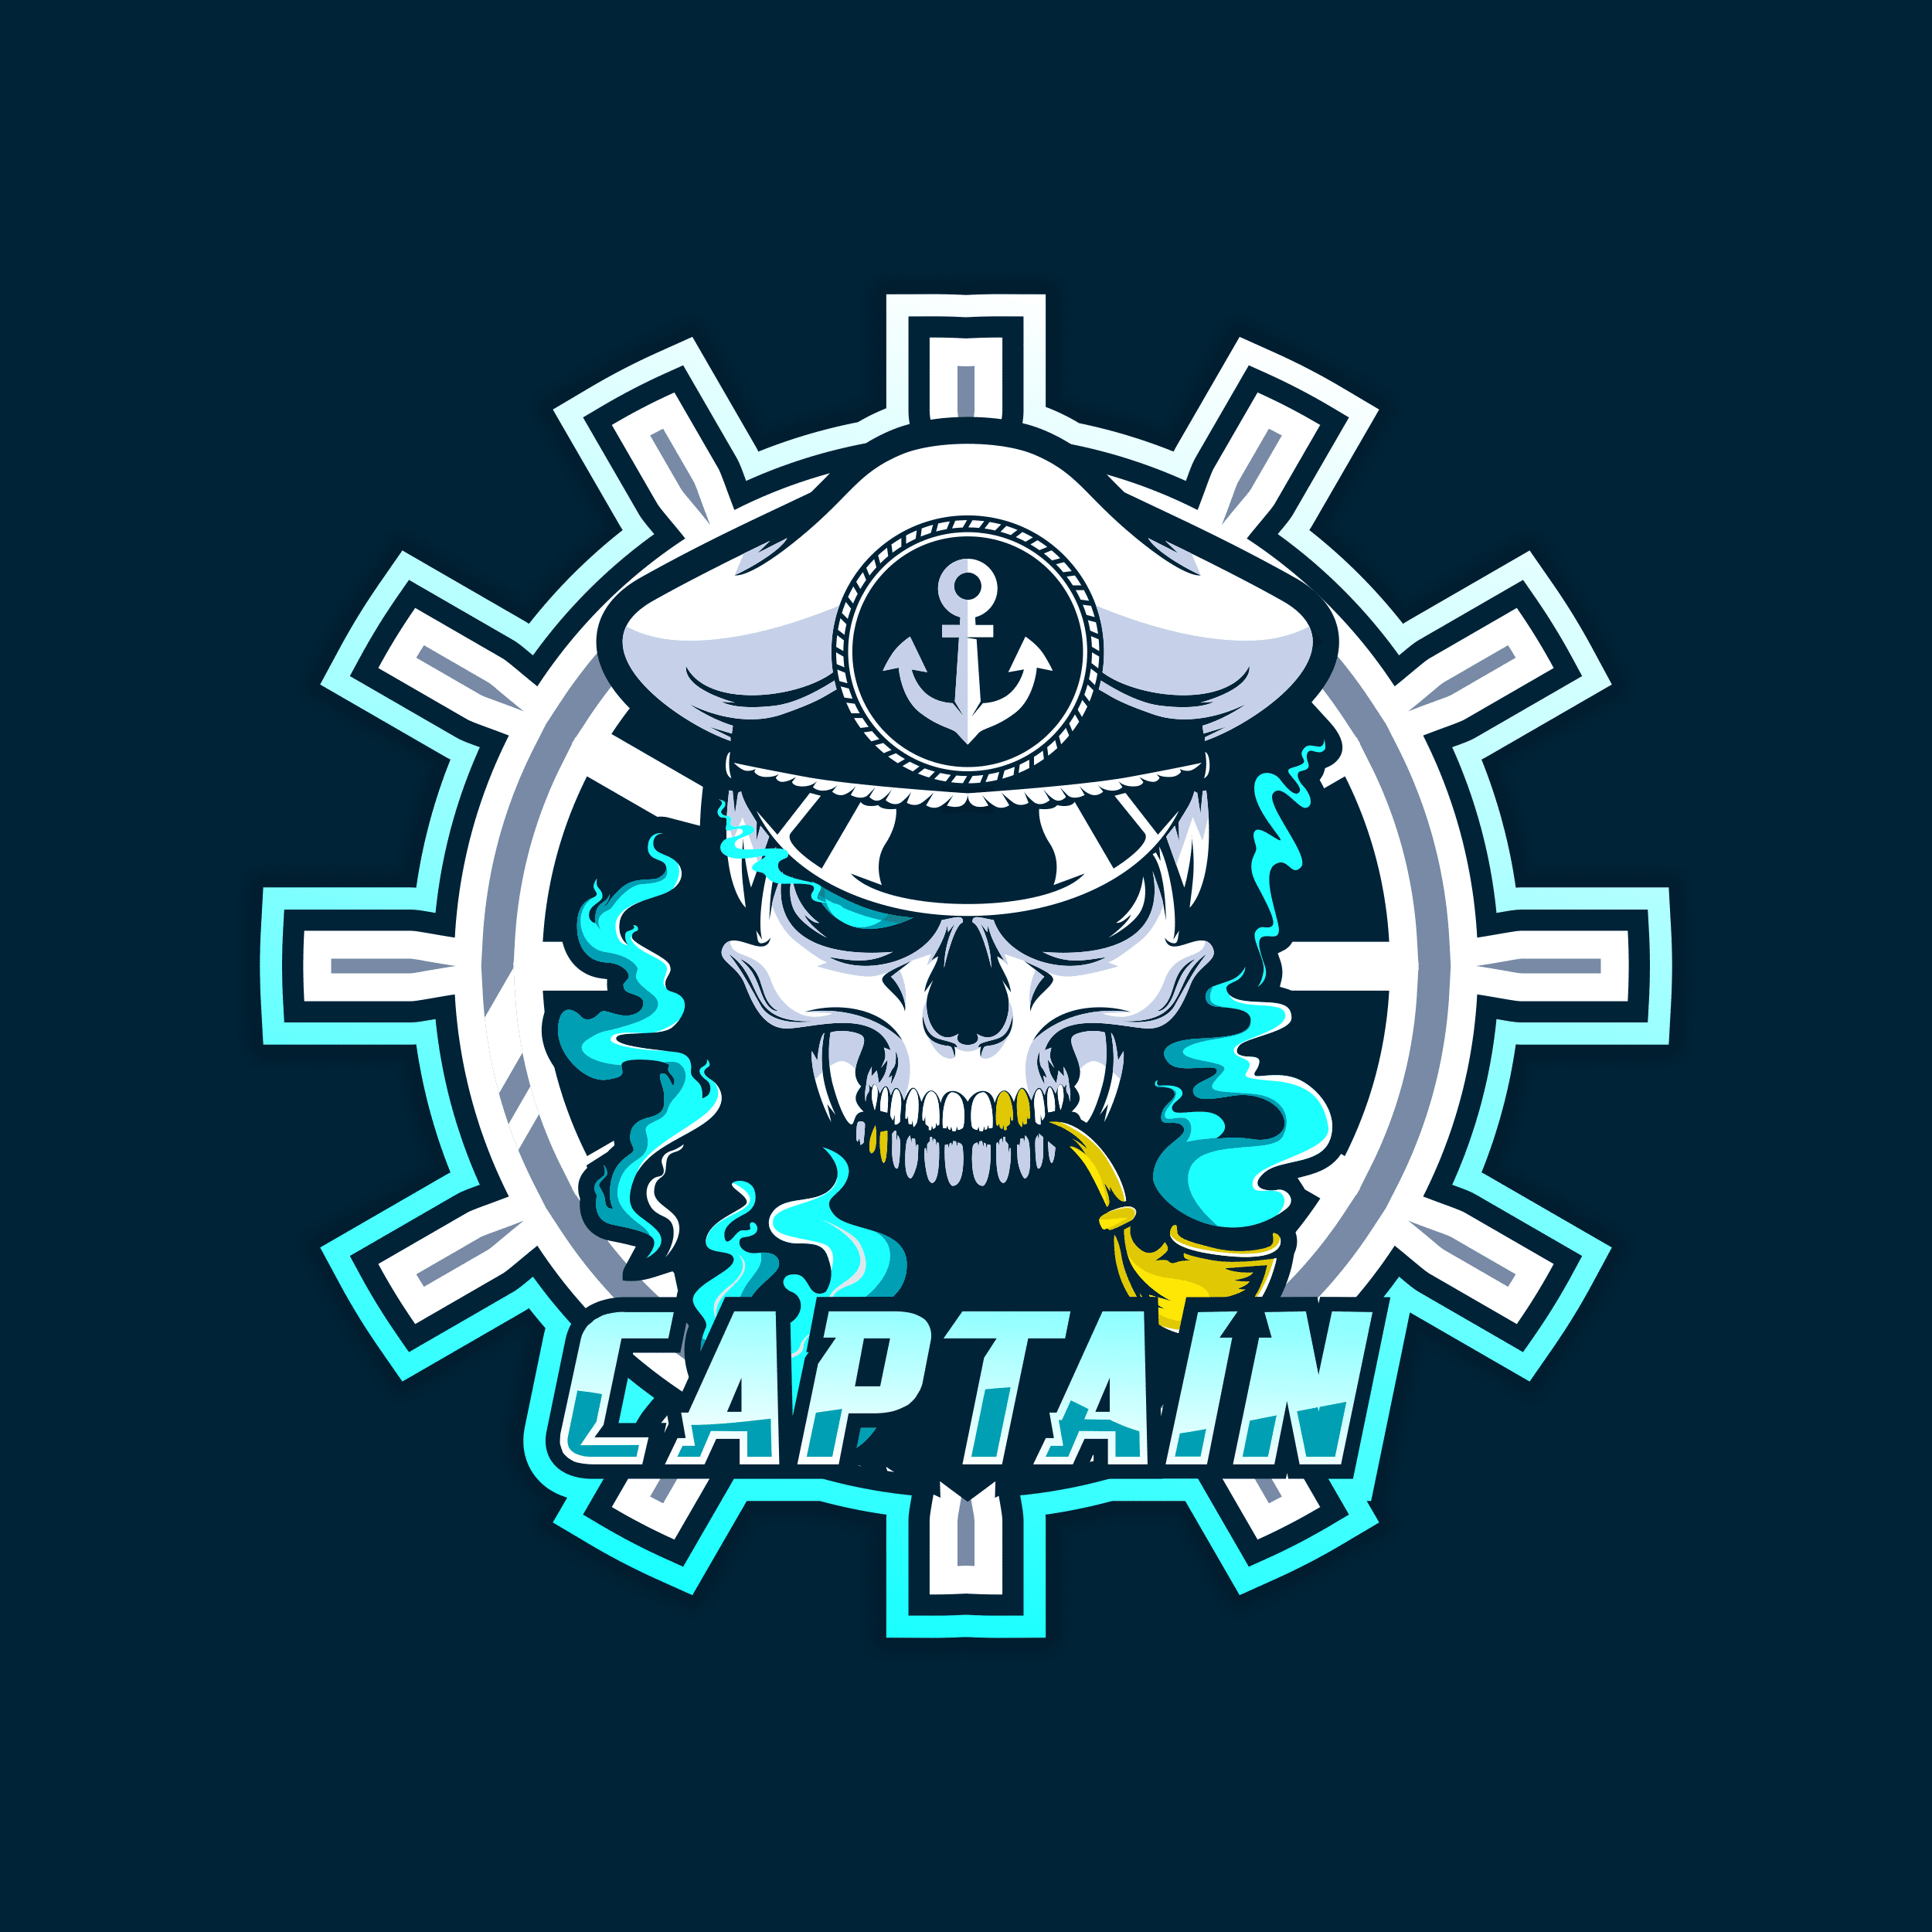 Illustration of a skull wearing a captain's hat with a ship wheel background, symbolizing adventurous spirit. Be your own captain and sail boldly.